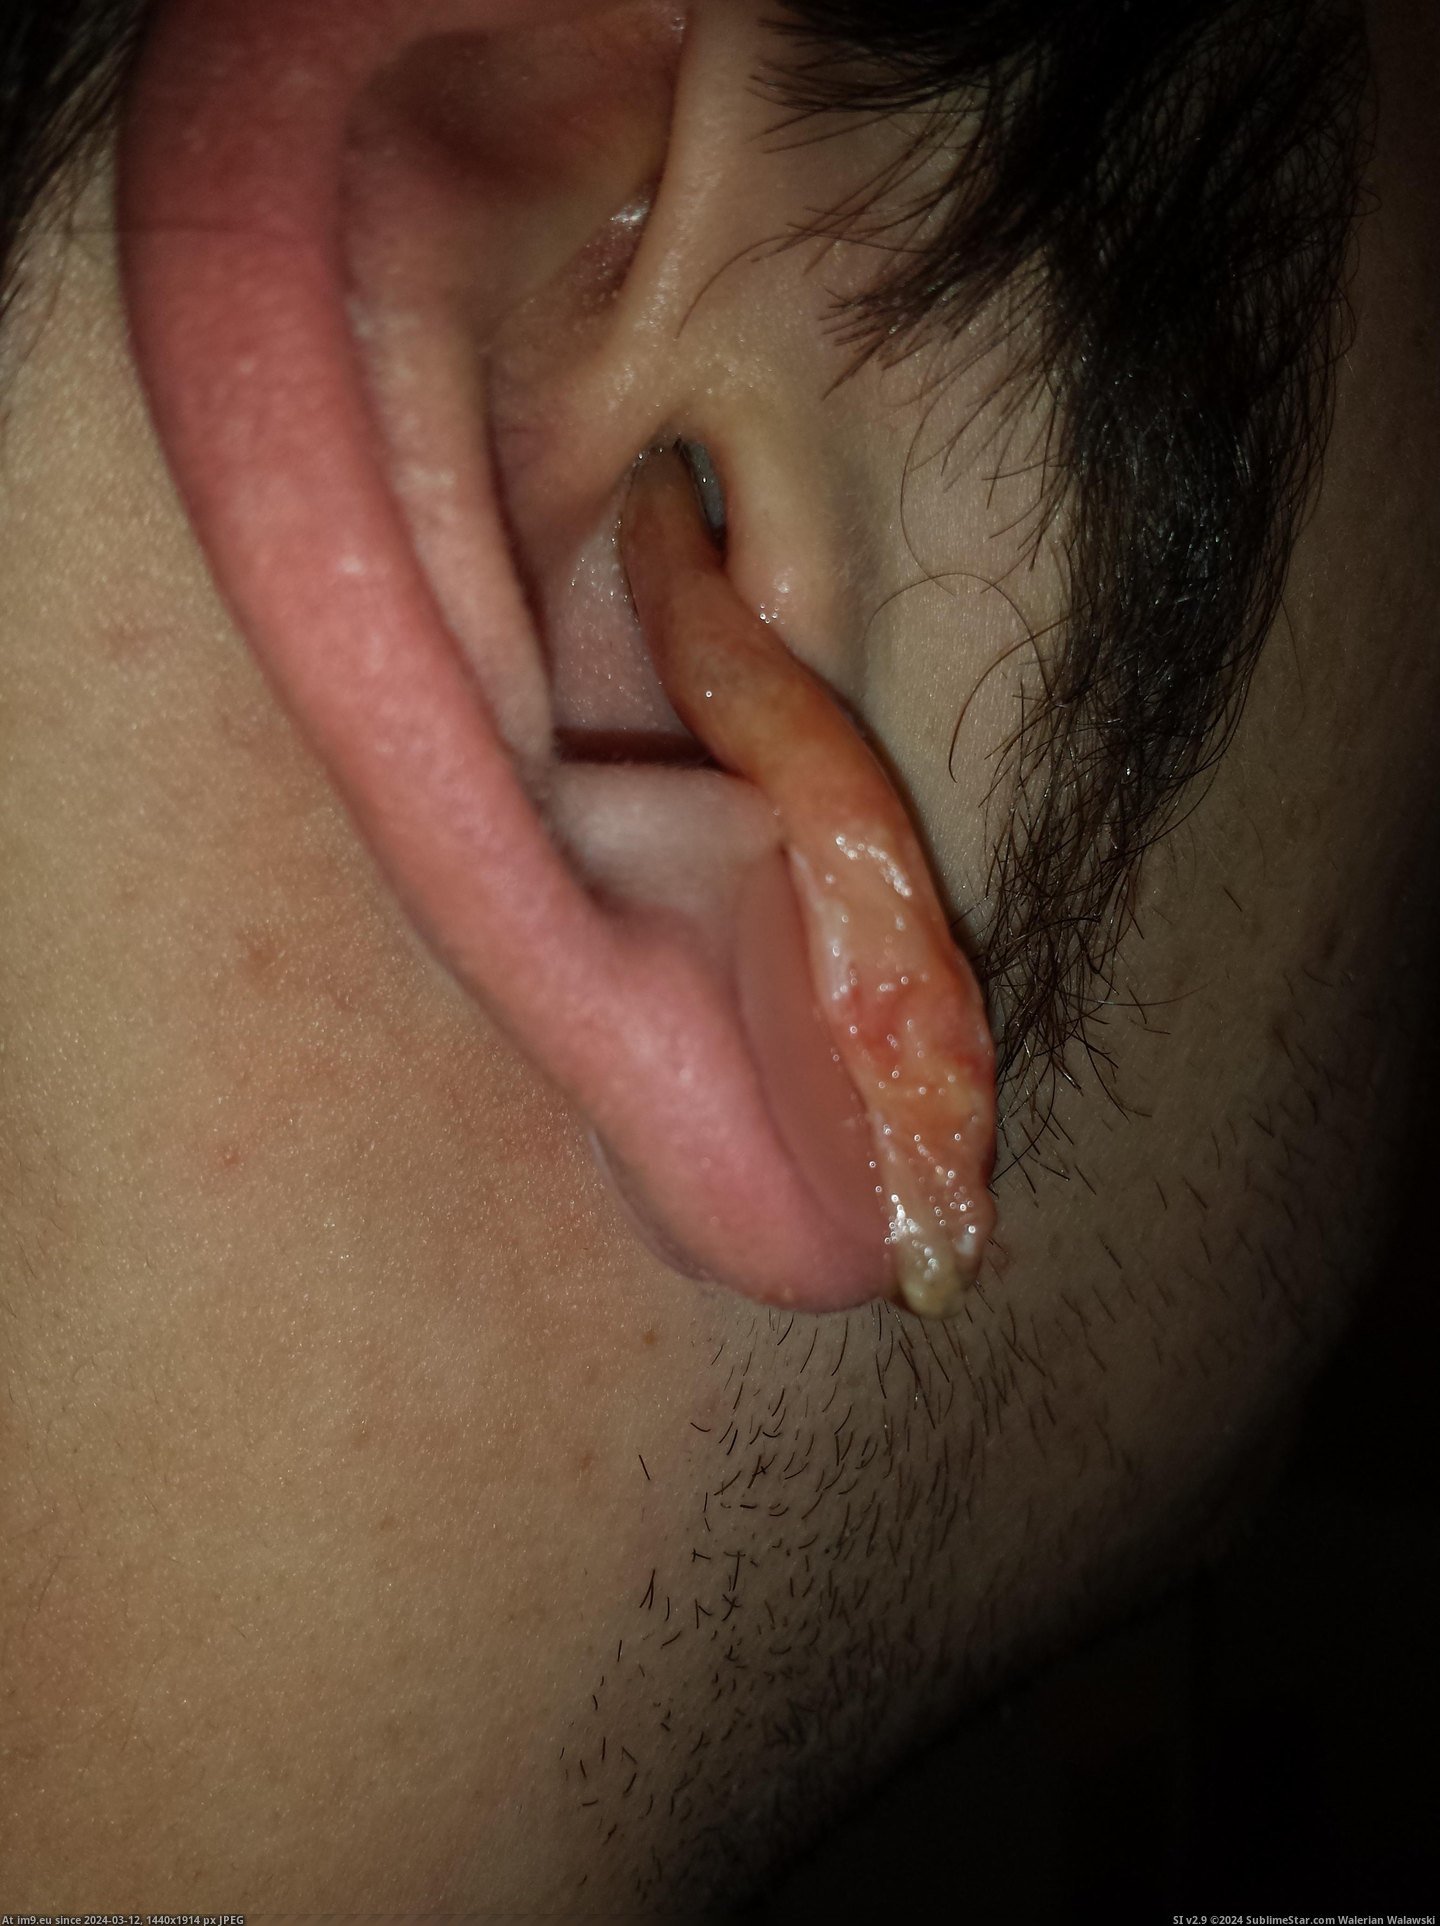 #Wtf #Ear #Infection #Crazy [Wtf] My crazy ear infection 2 Pic. (Изображение из альбом My r/WTF favs))